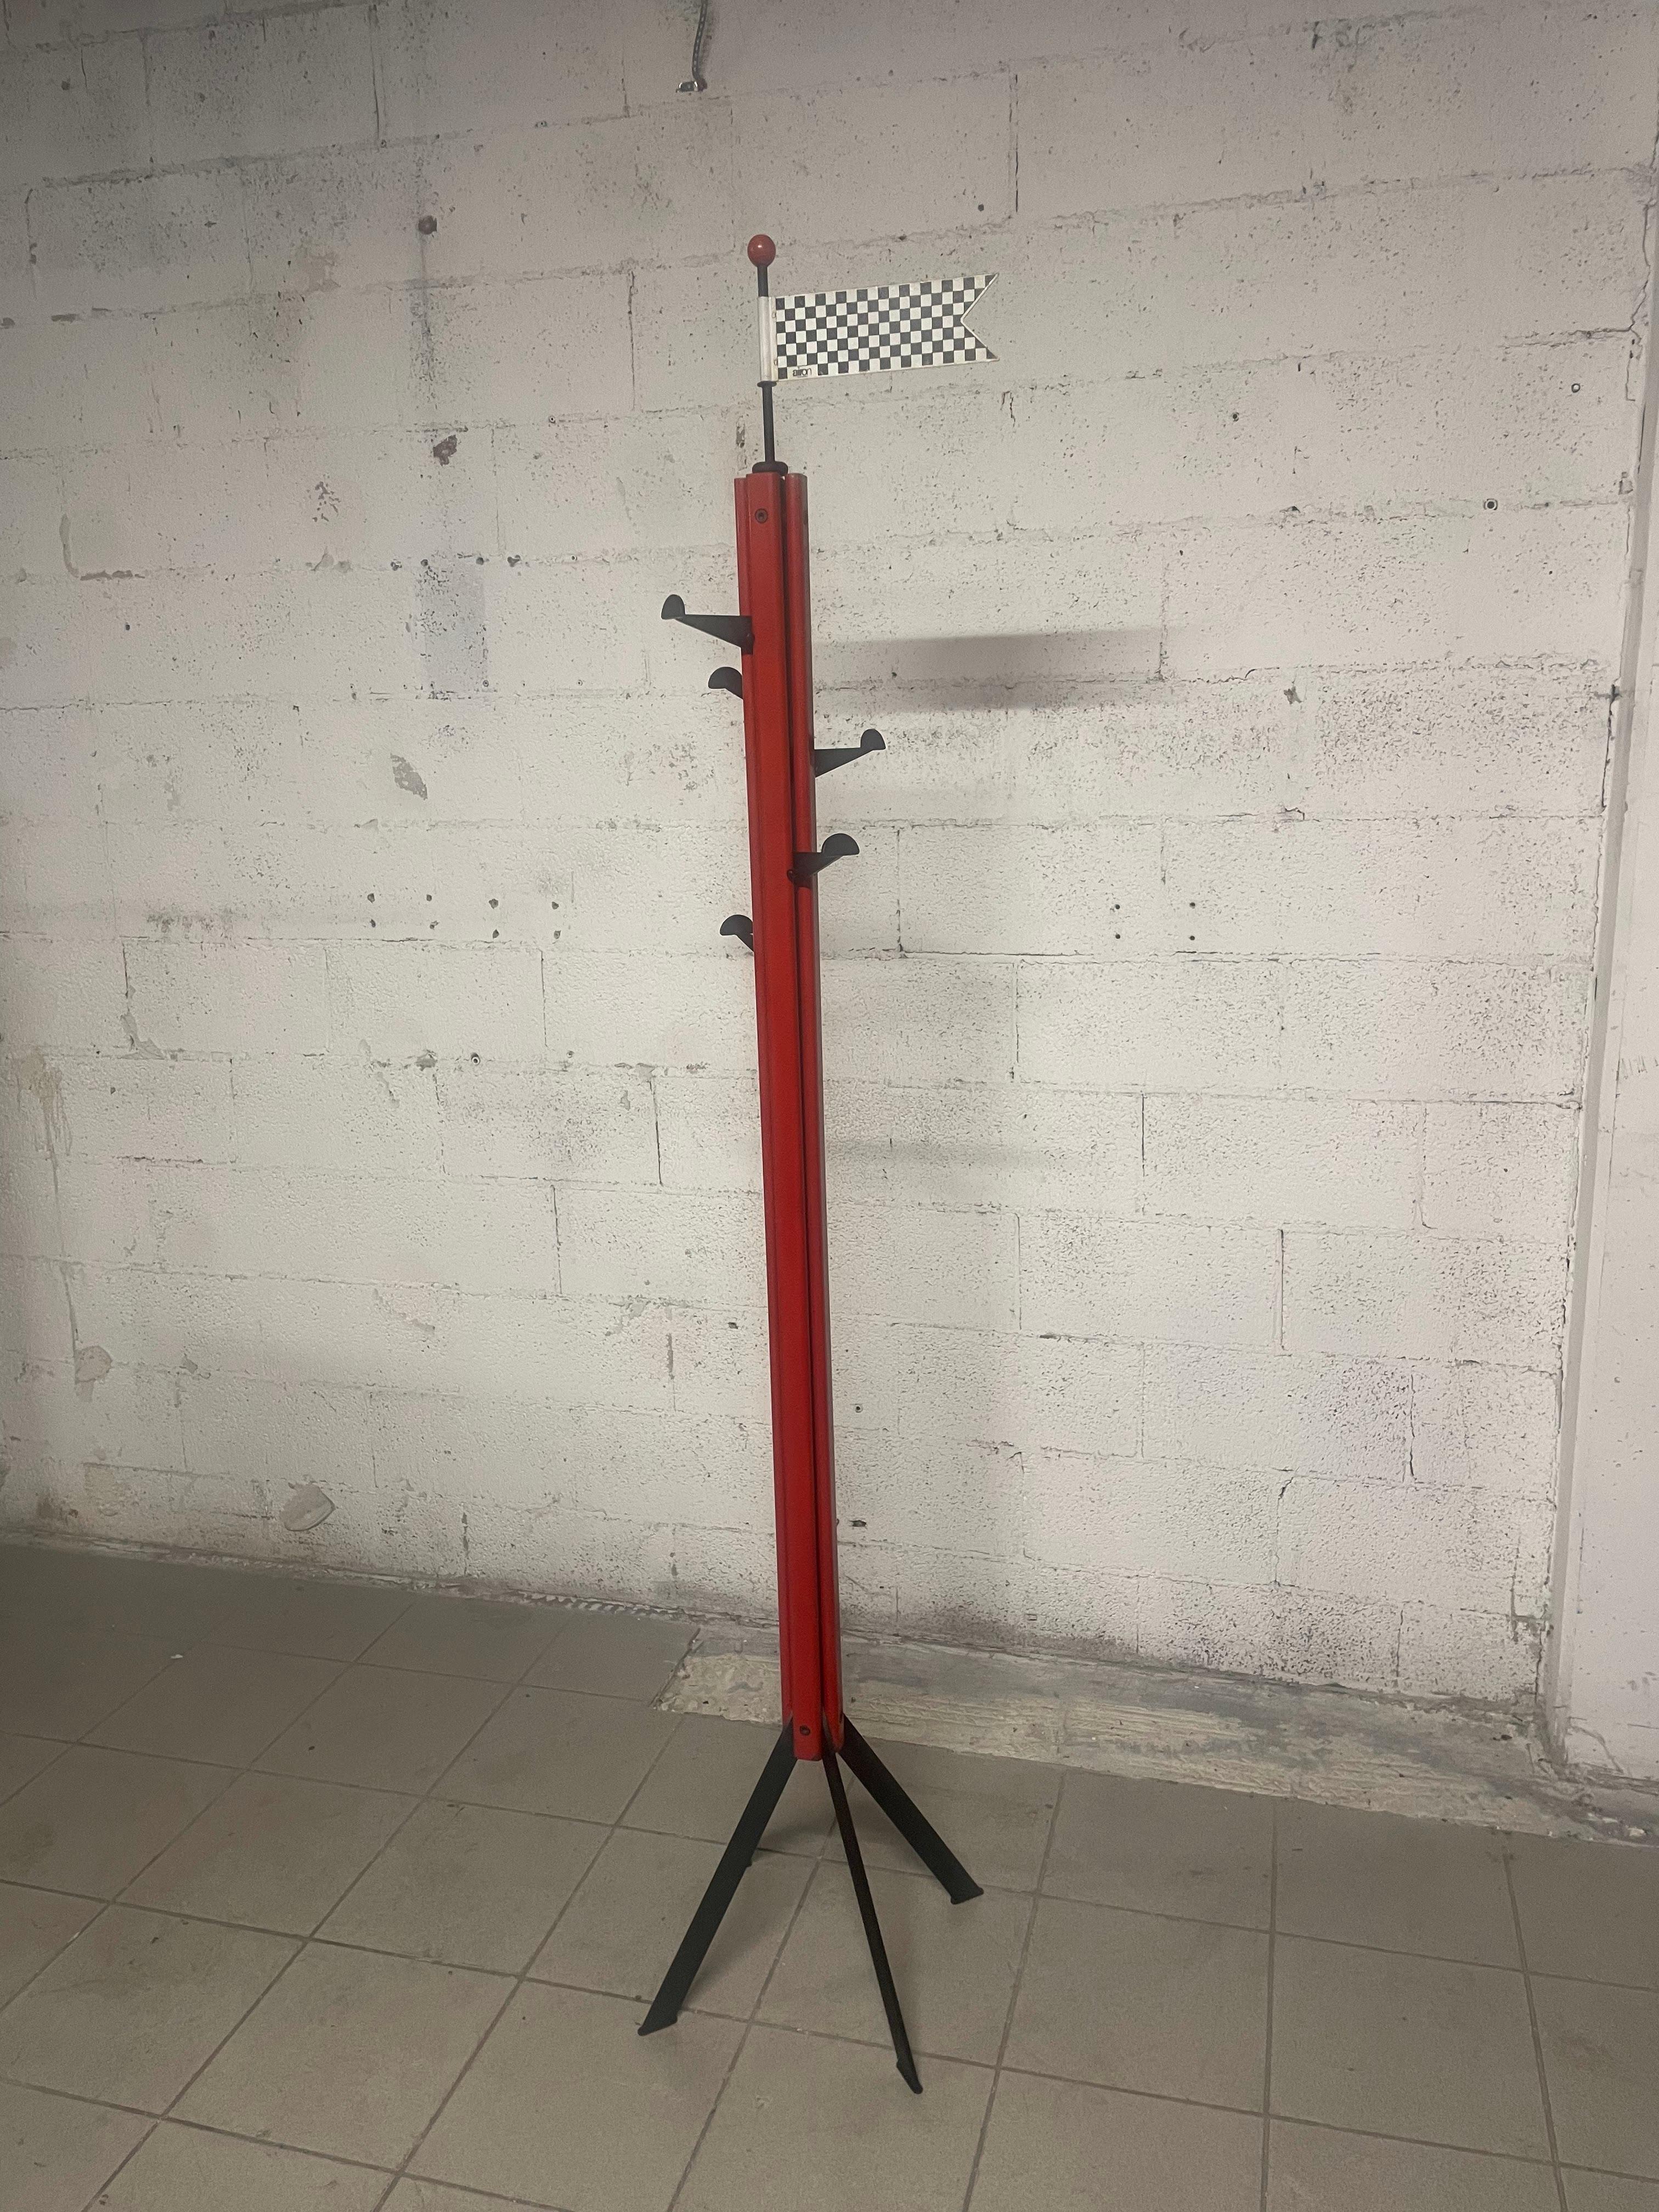 1980s coat stand produced by Airon Milano.
Red and black lacquered metal frame. 
Adjustable height coat hooks and flag marker mounted at apex.
Good vintage condition.